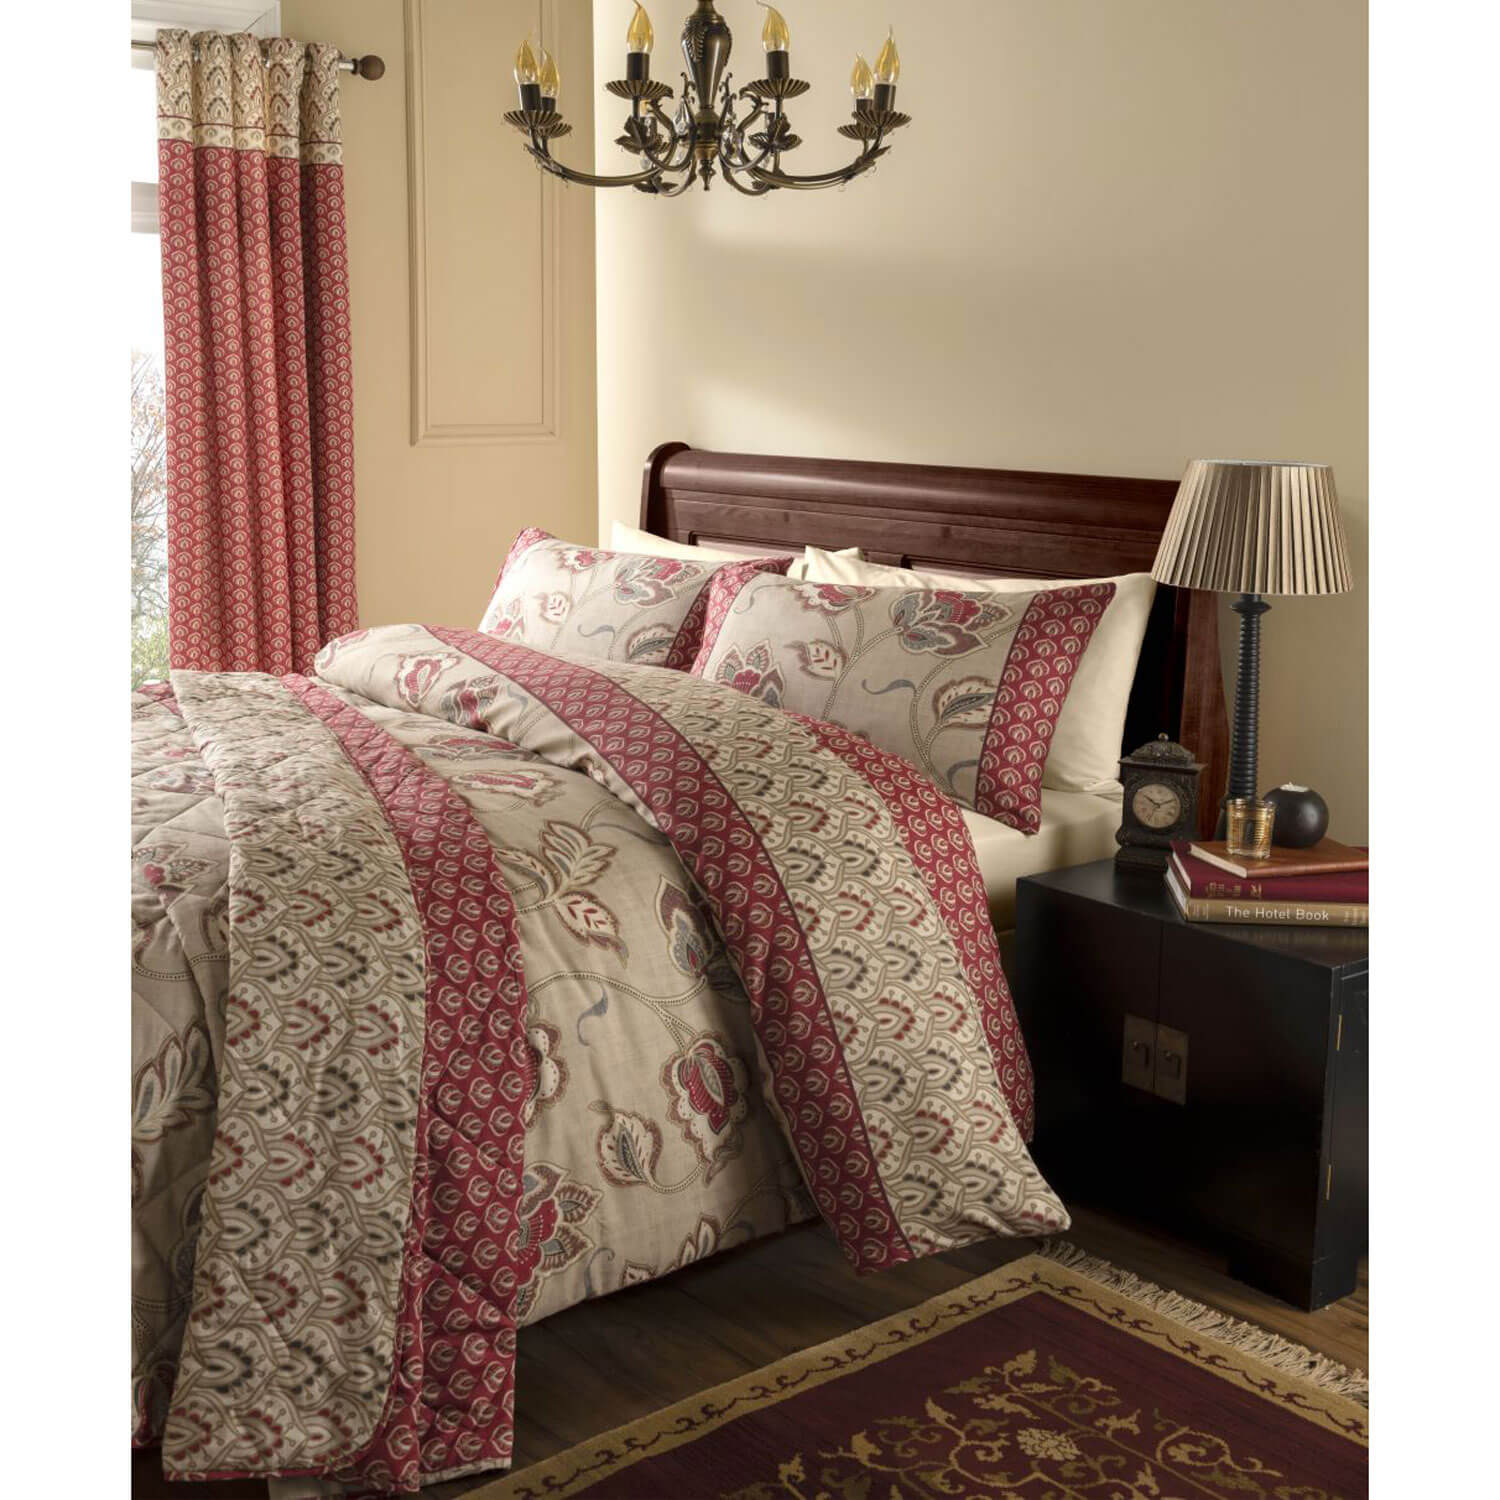  The Home Collection Kashmir Duvet Cover Set 1 Shaws Department Stores